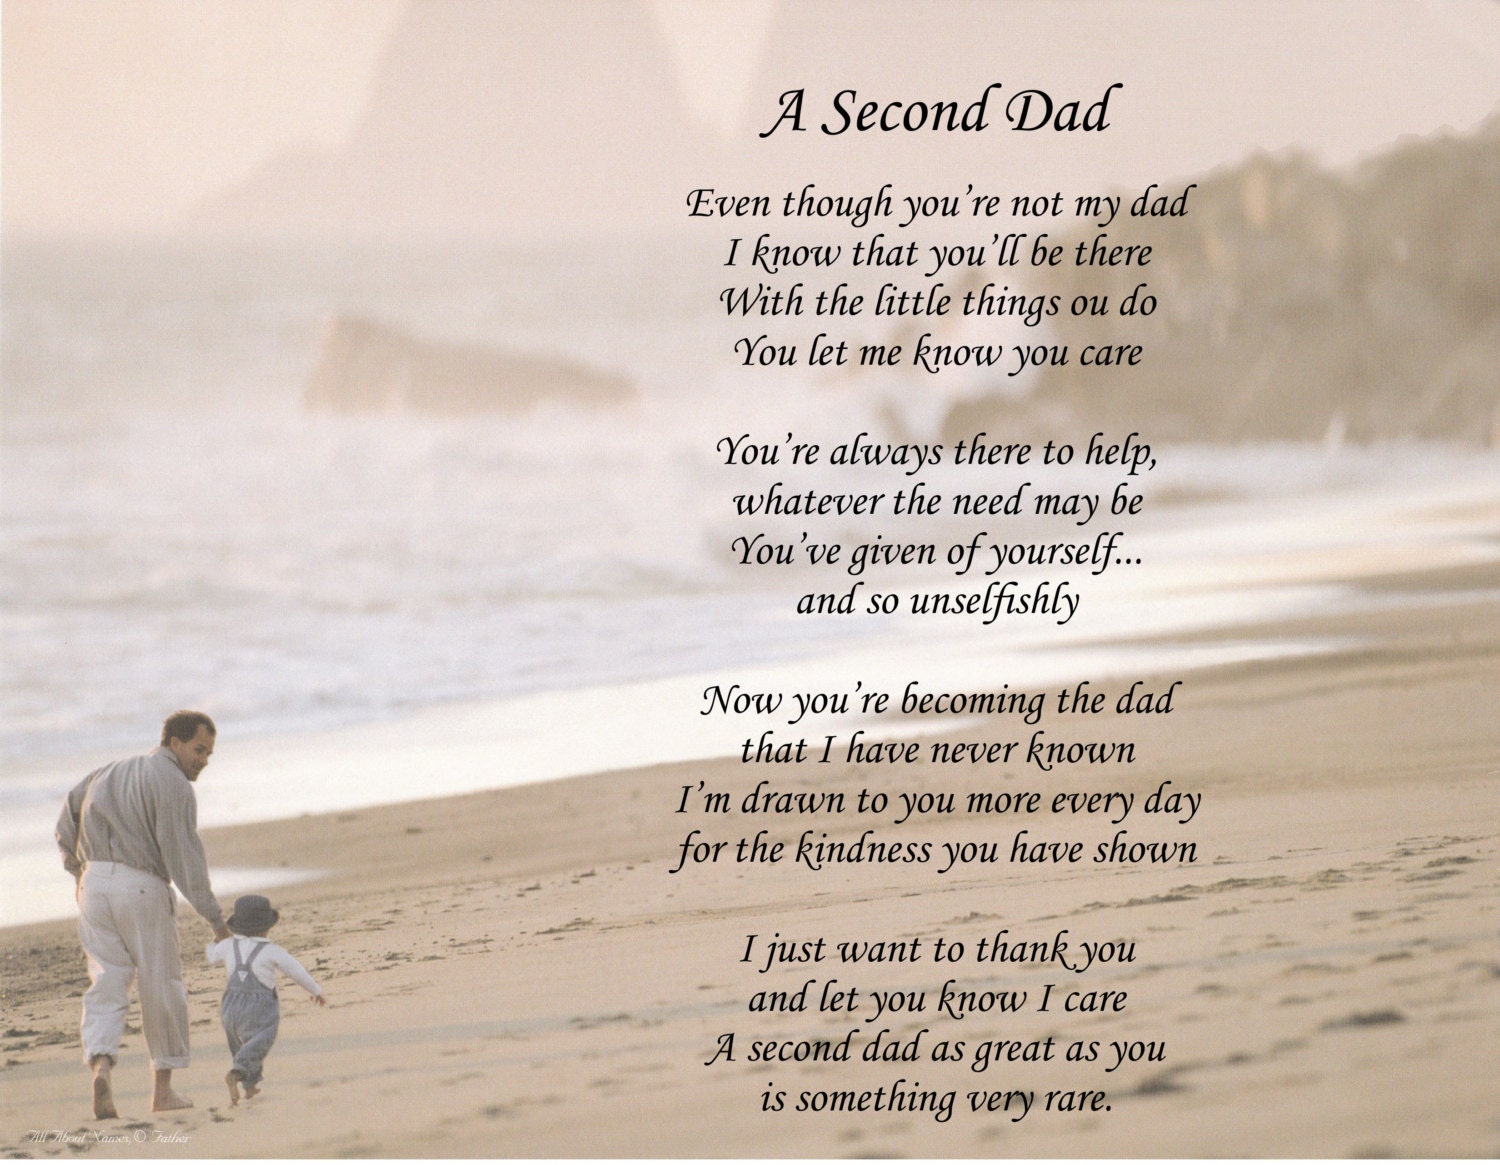 Personalized Poem A Second Dad